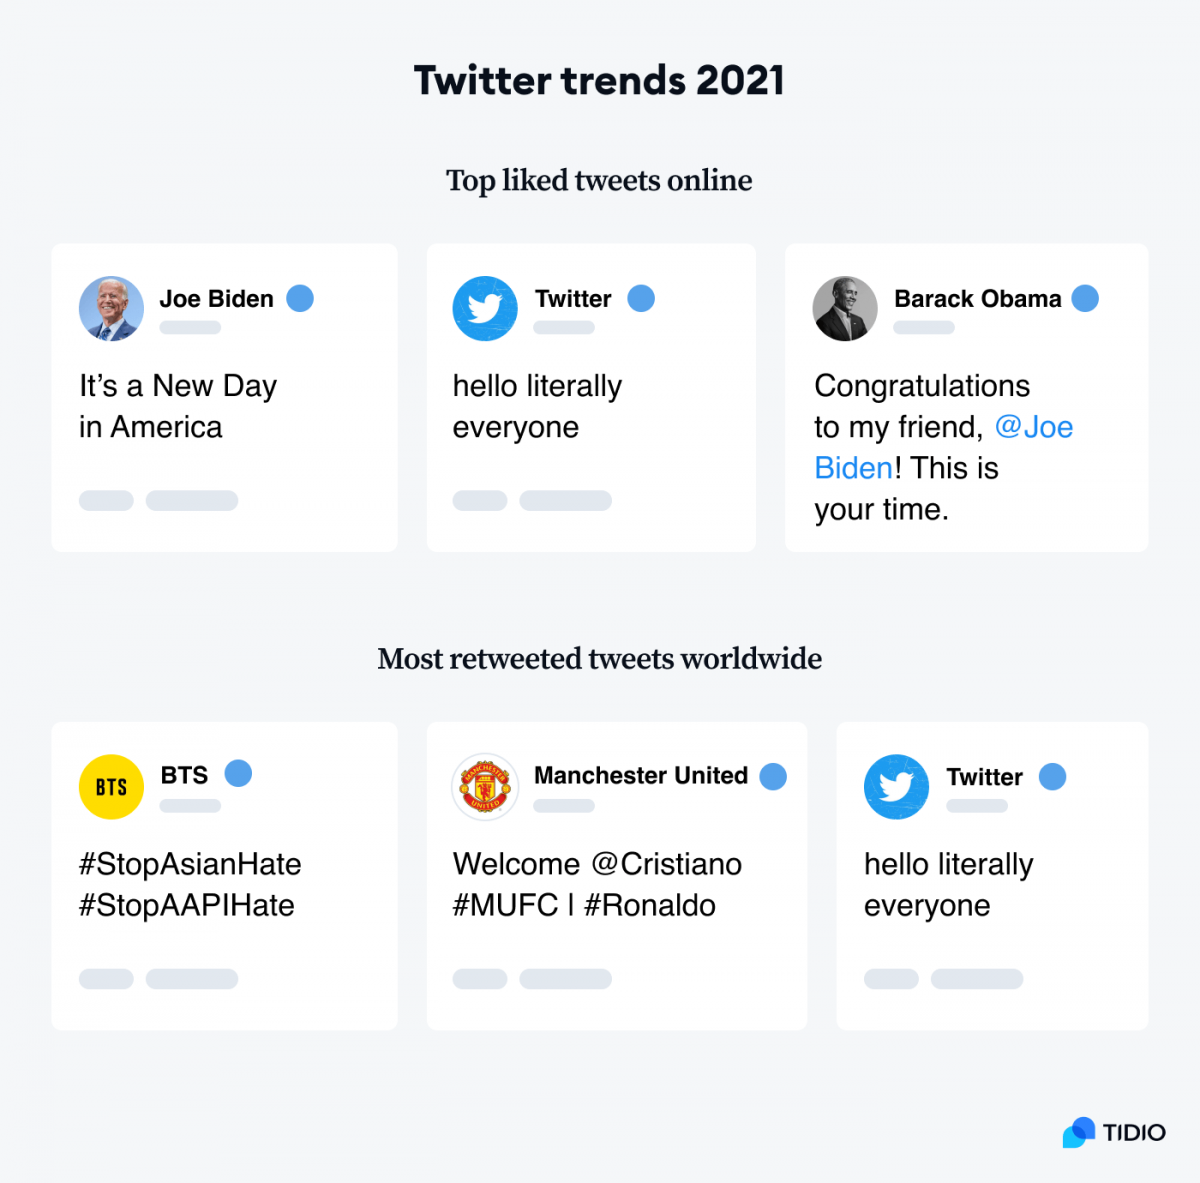 Infographic showing Twitter trends of 2021